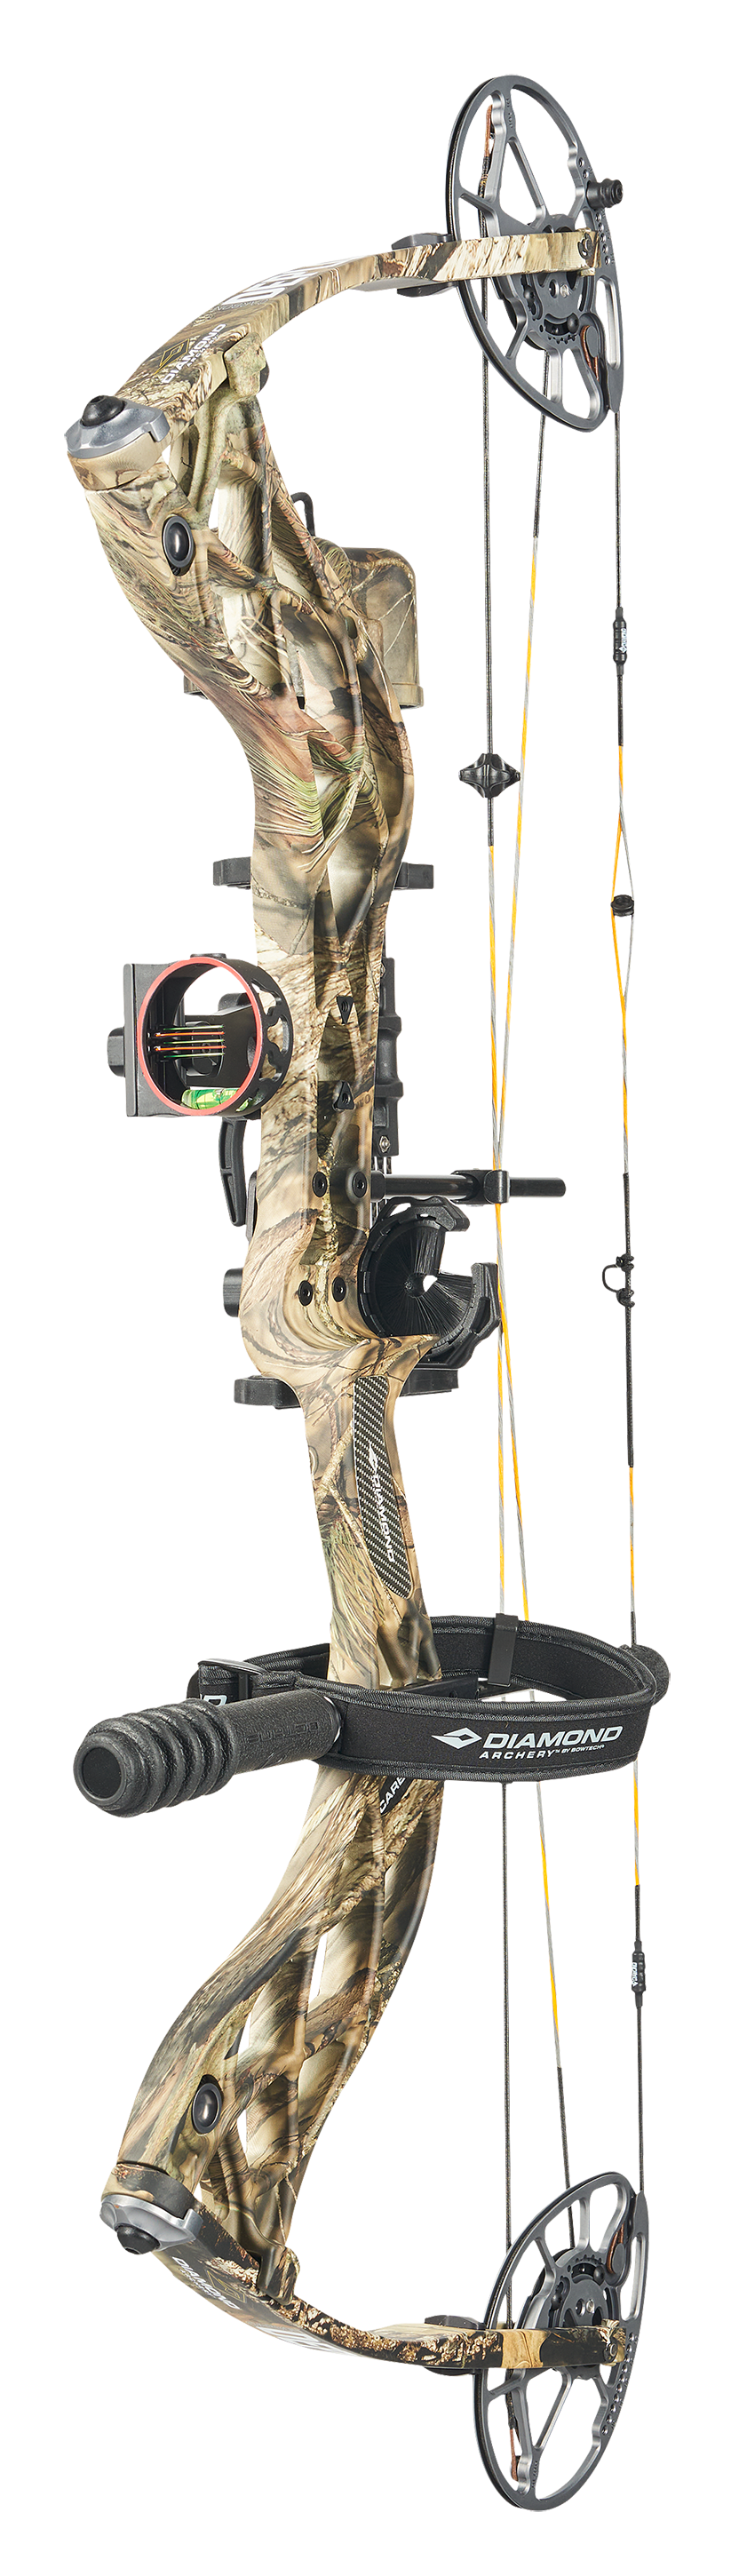 Diamond by Bowtech Deploy SB R A K  Compound Bow Package - Right Hand - 60-70 lbs 